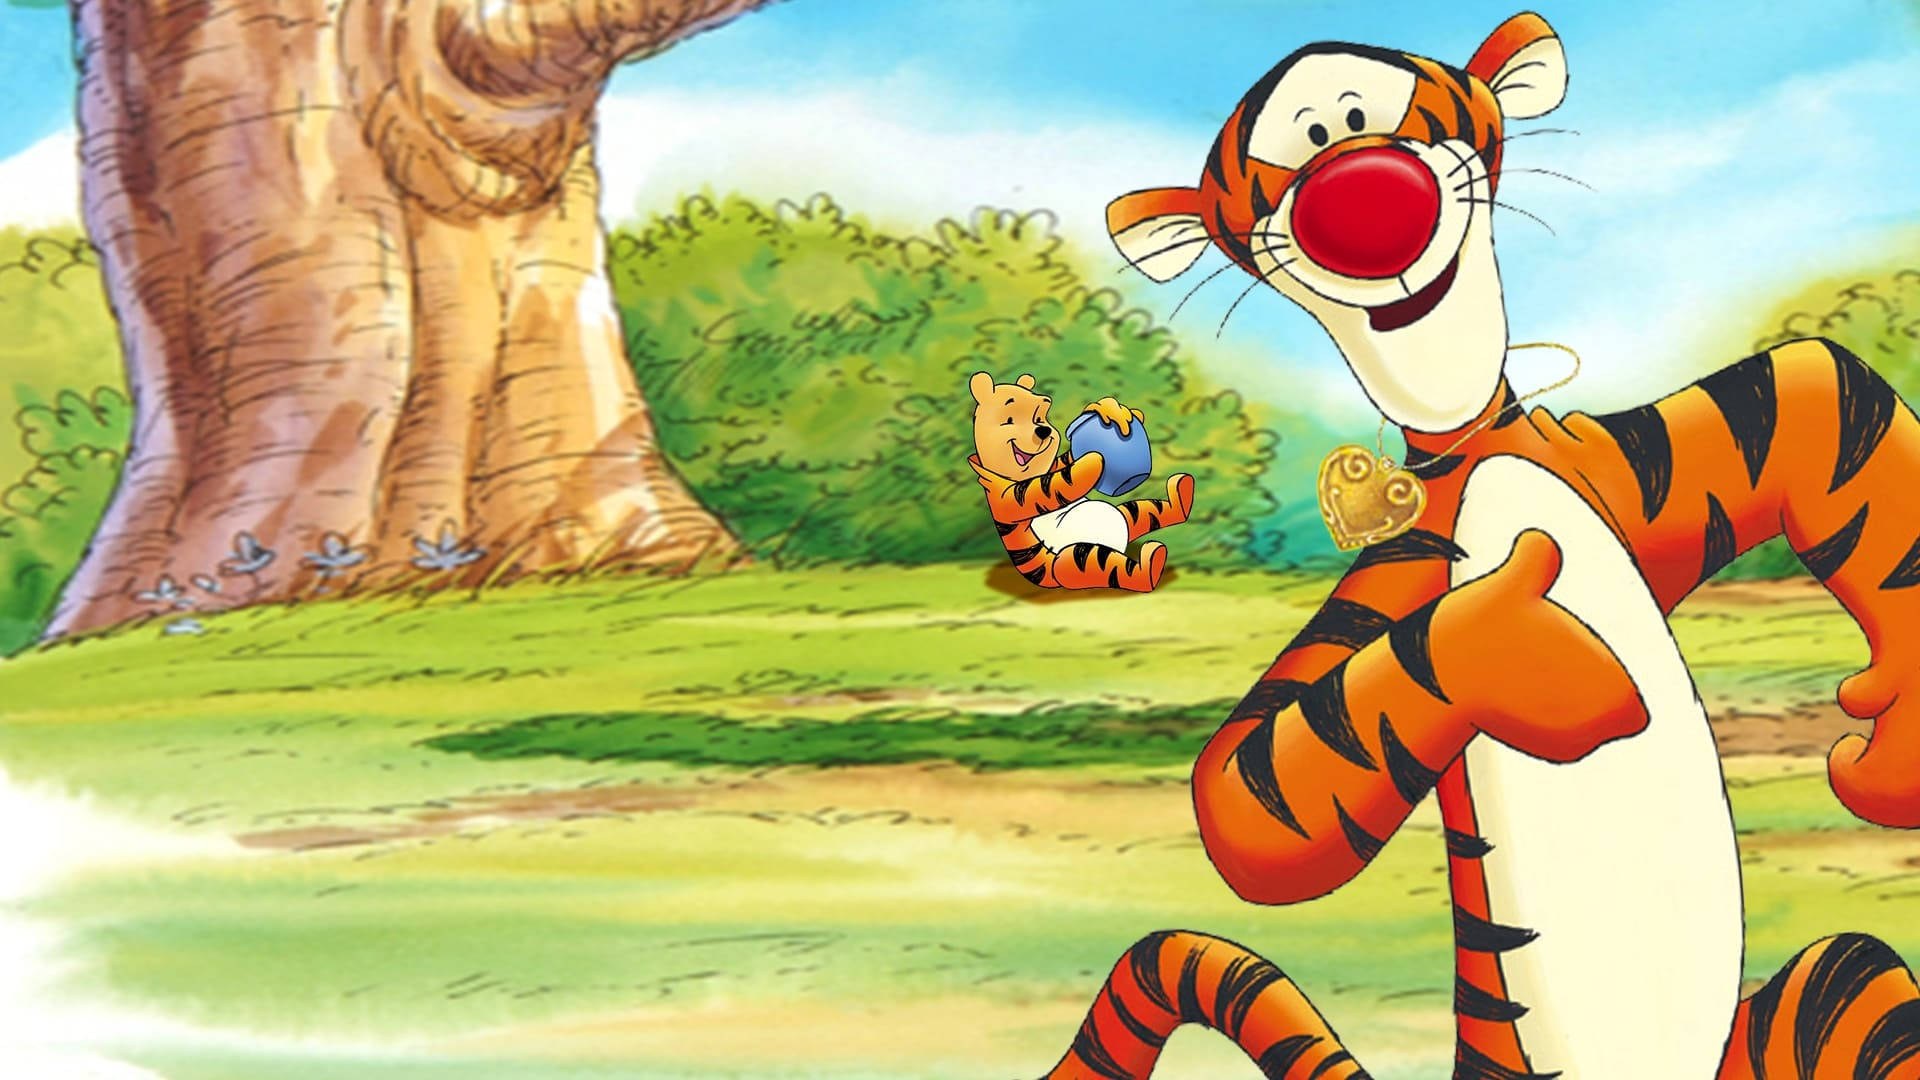 Pooh Dressed As Tigger Background